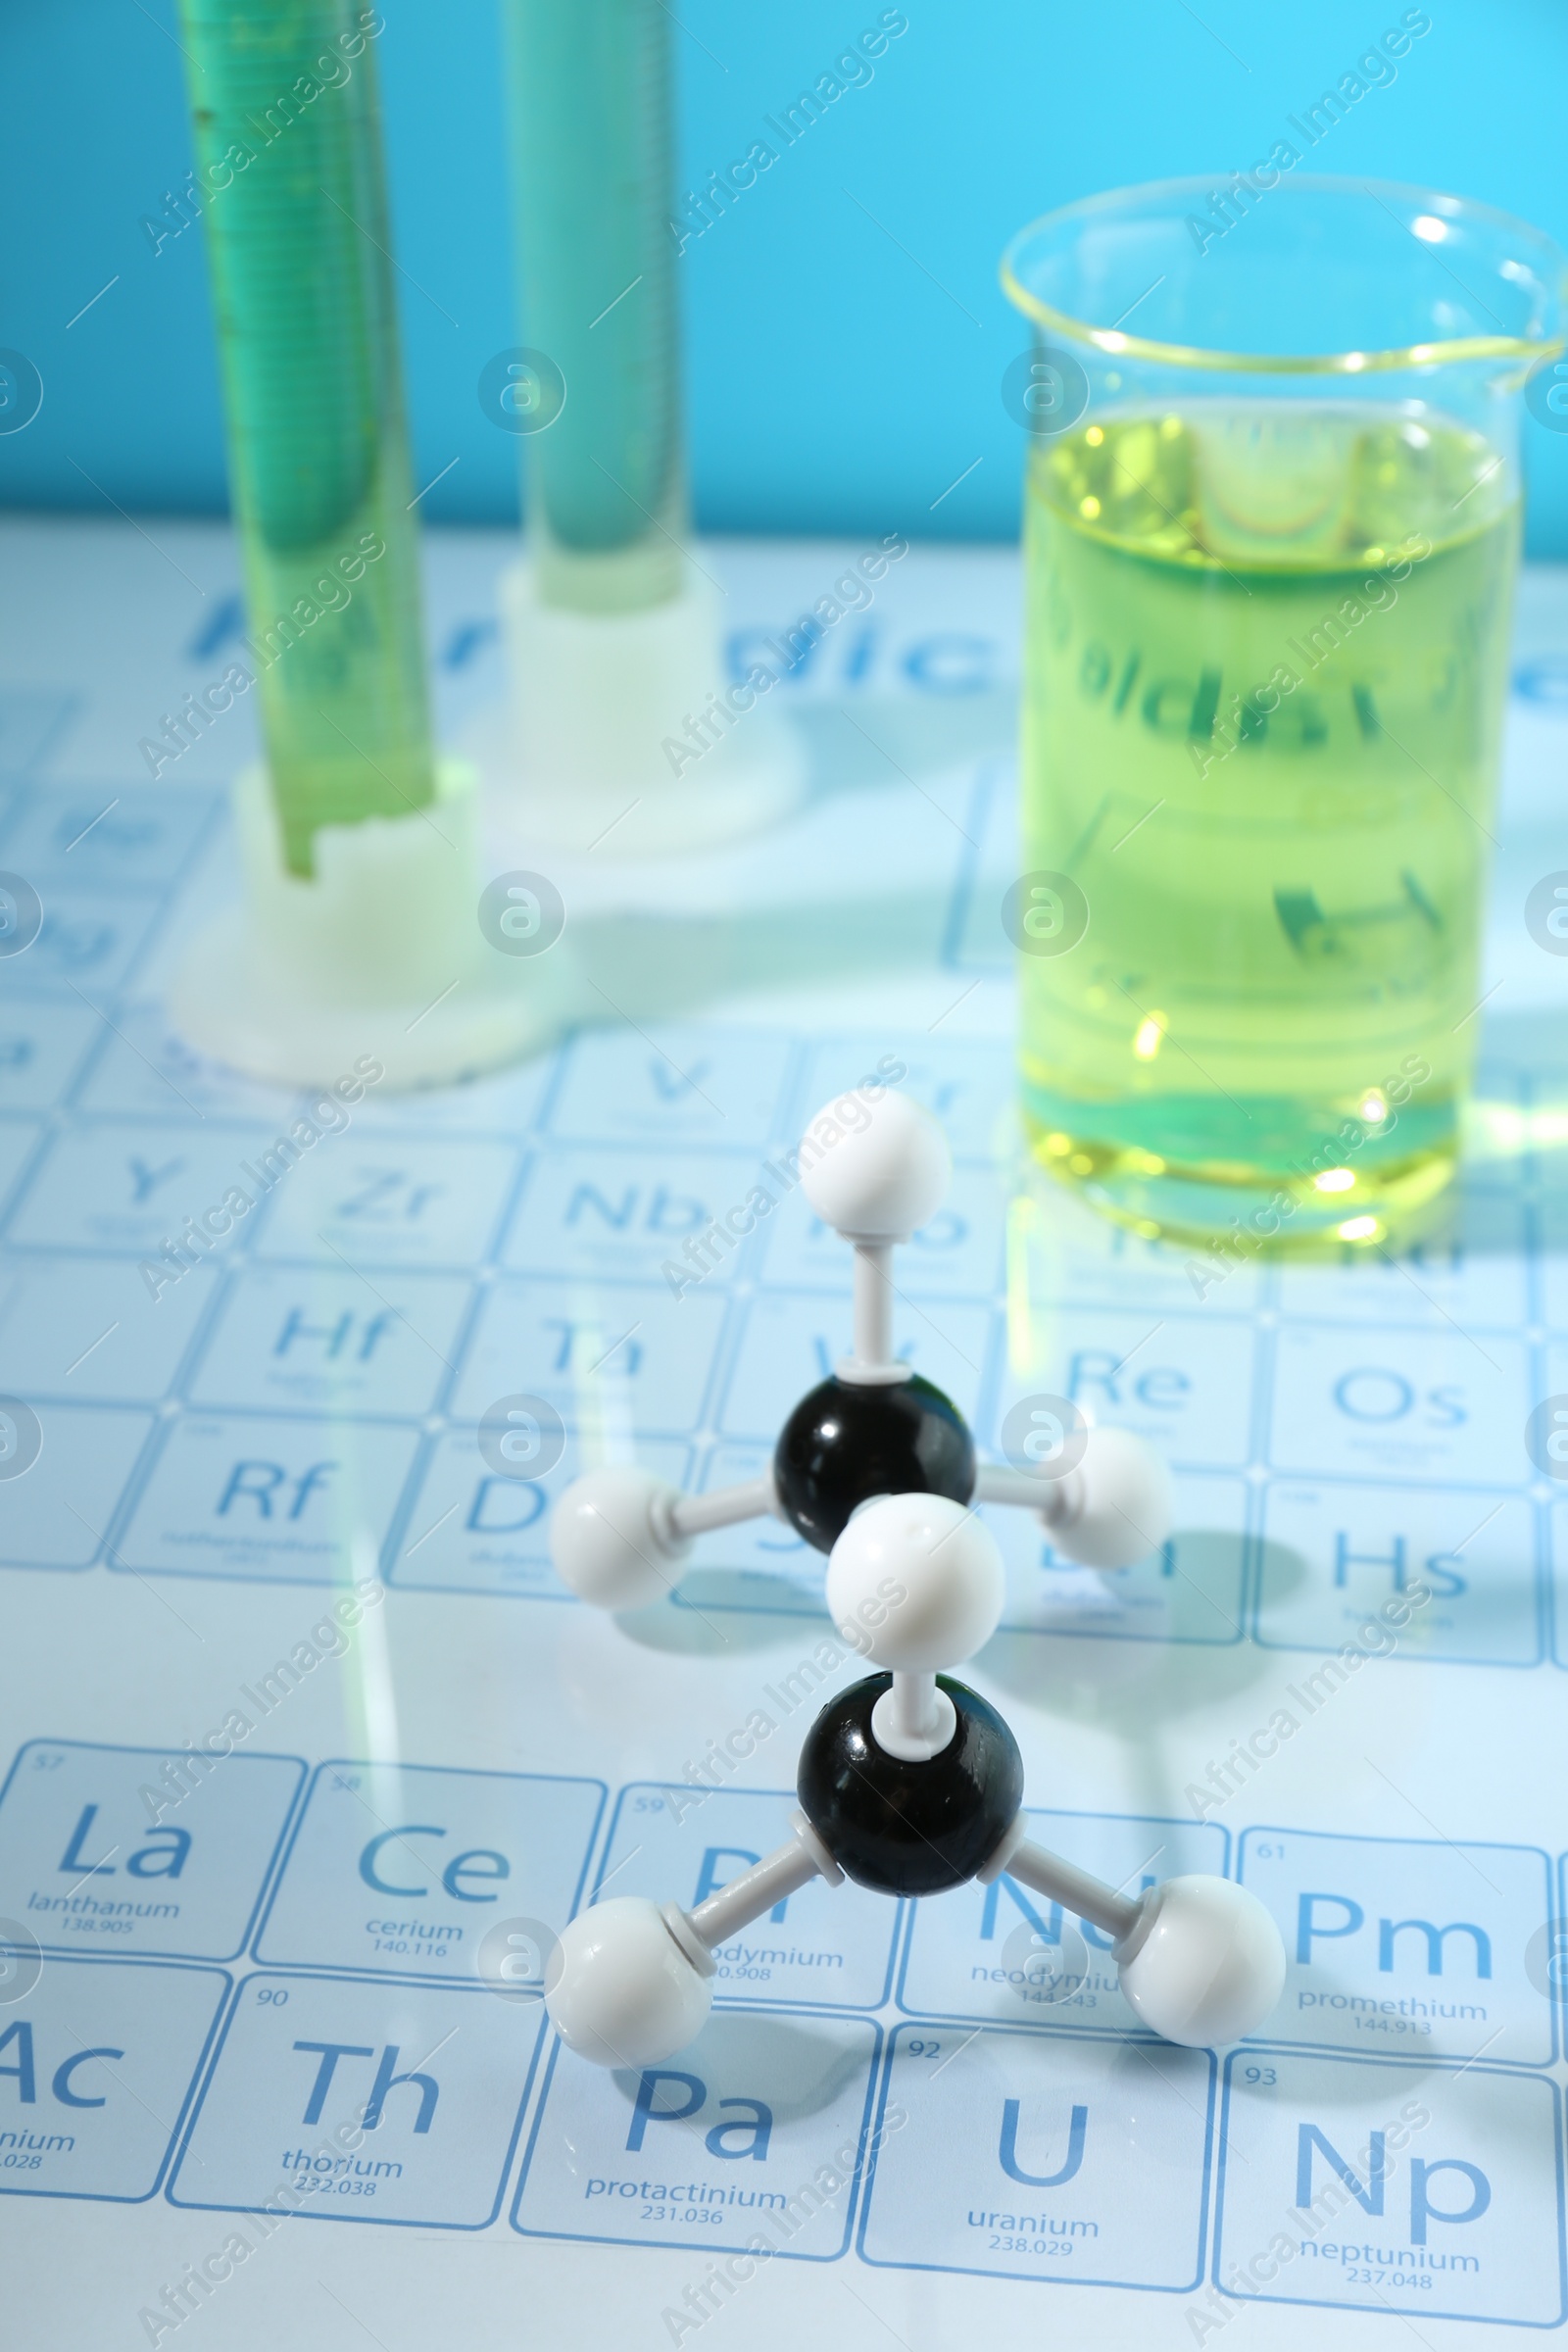 Photo of Molecular model and laboratory glassware on periodic table